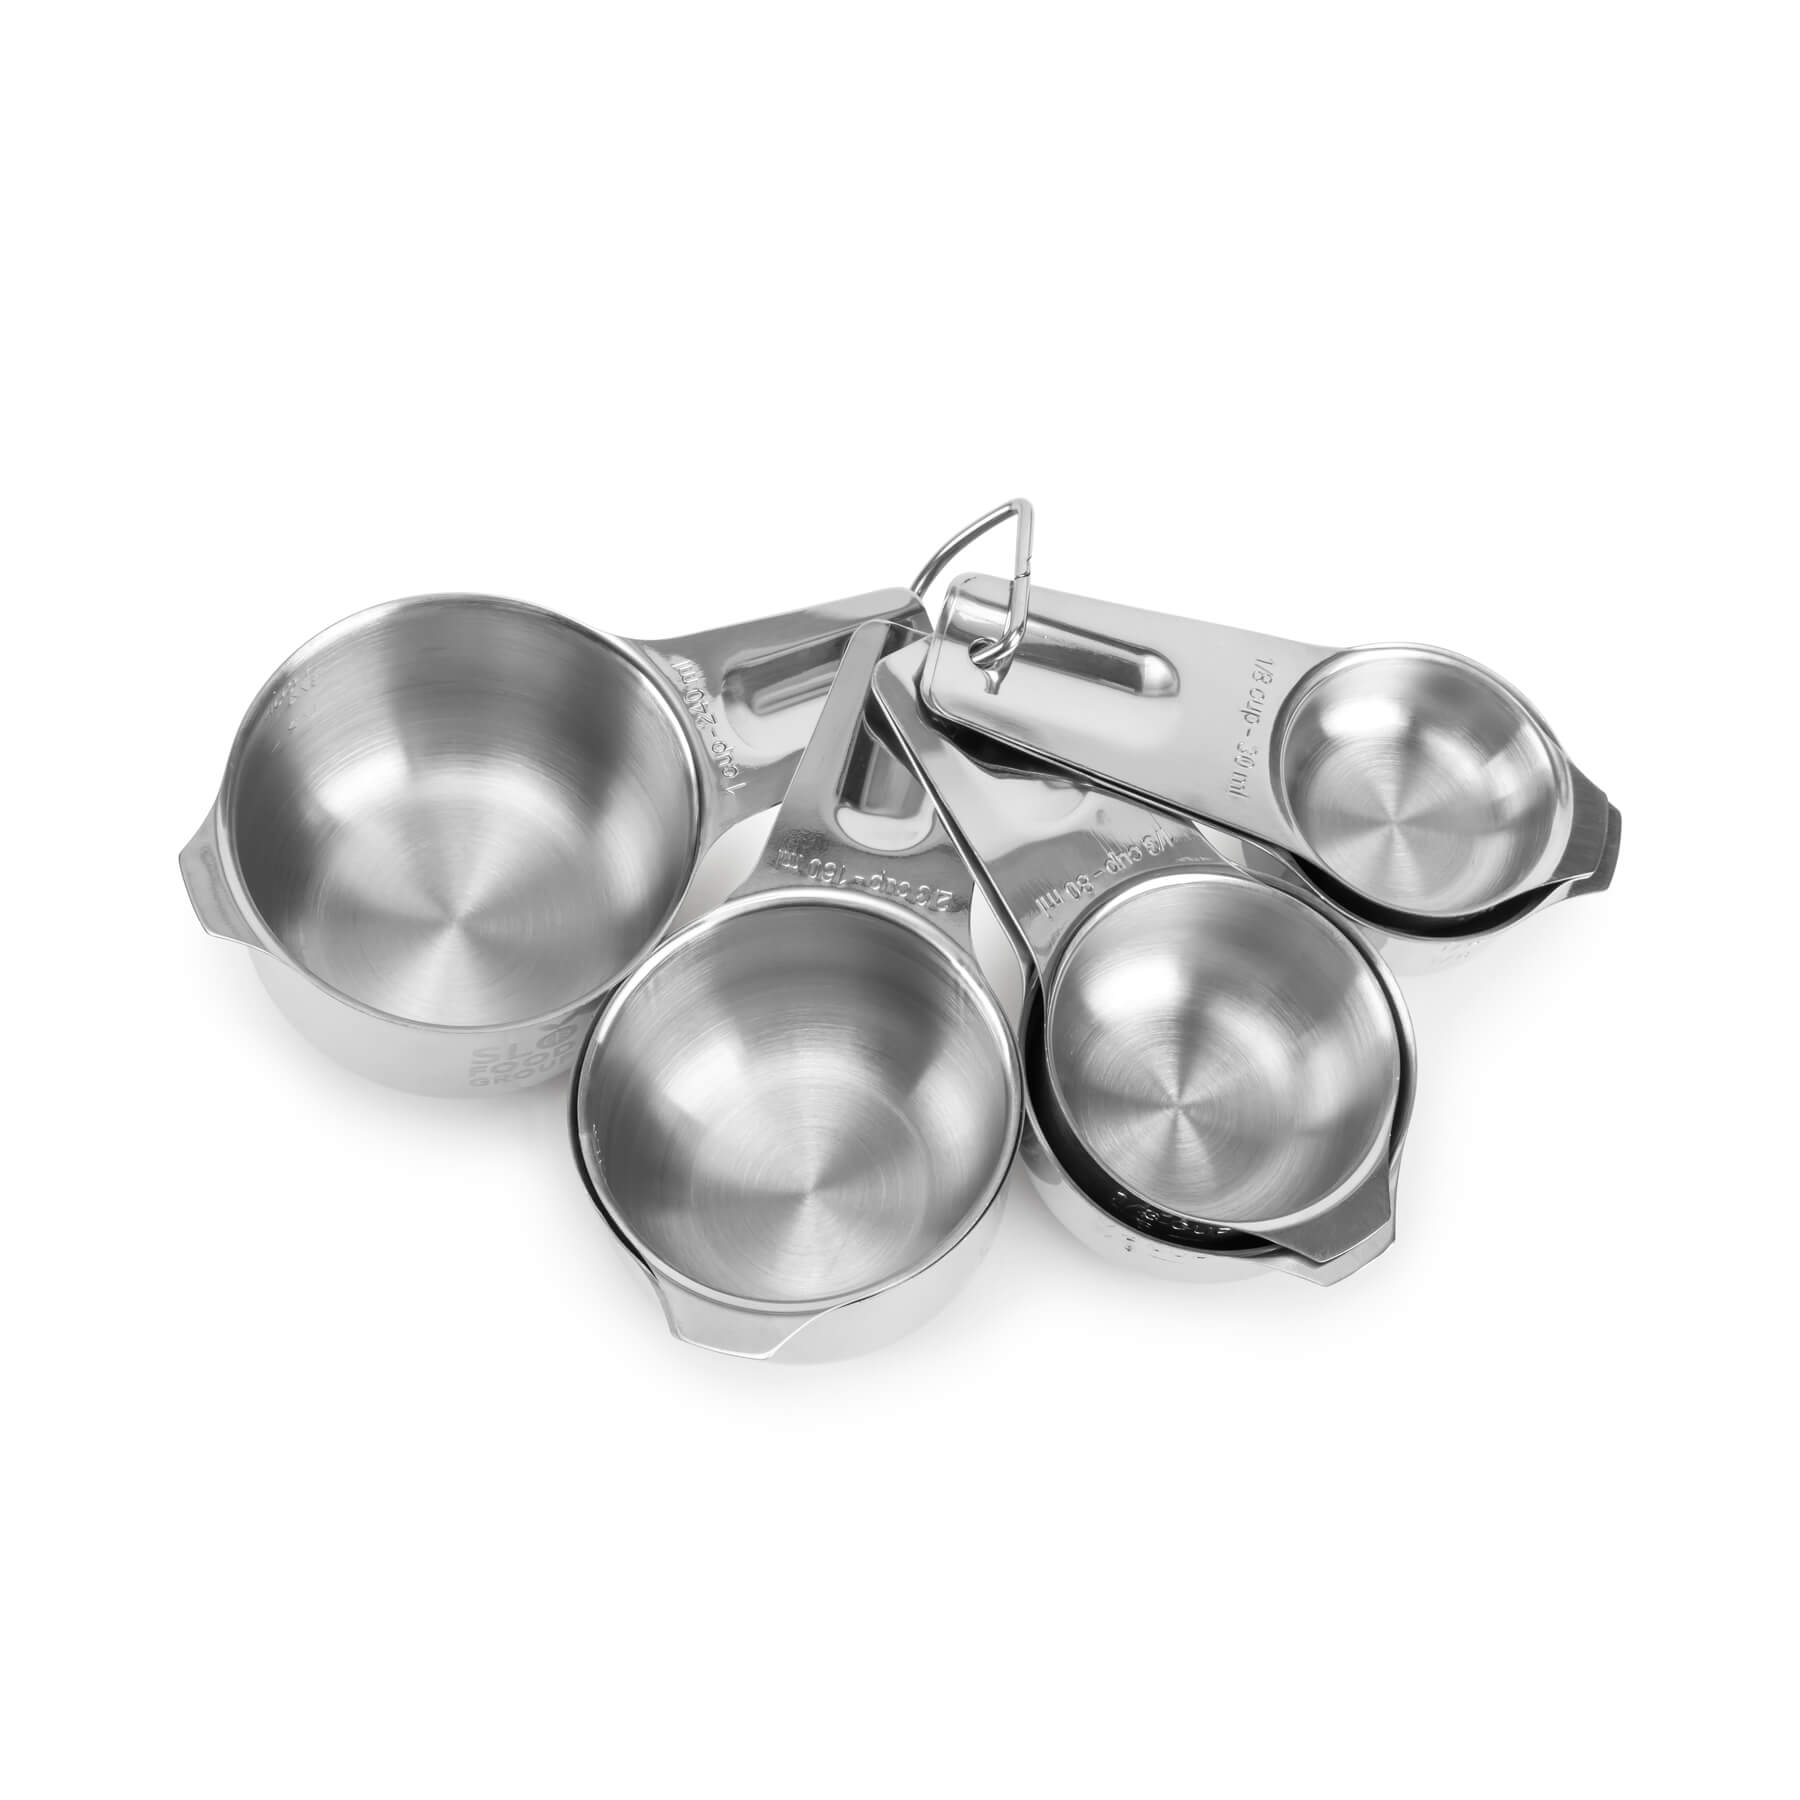 Slofoodgroup Measuring Cup Set - 7 Piece Stainless Steel Measuring Cups, Silver